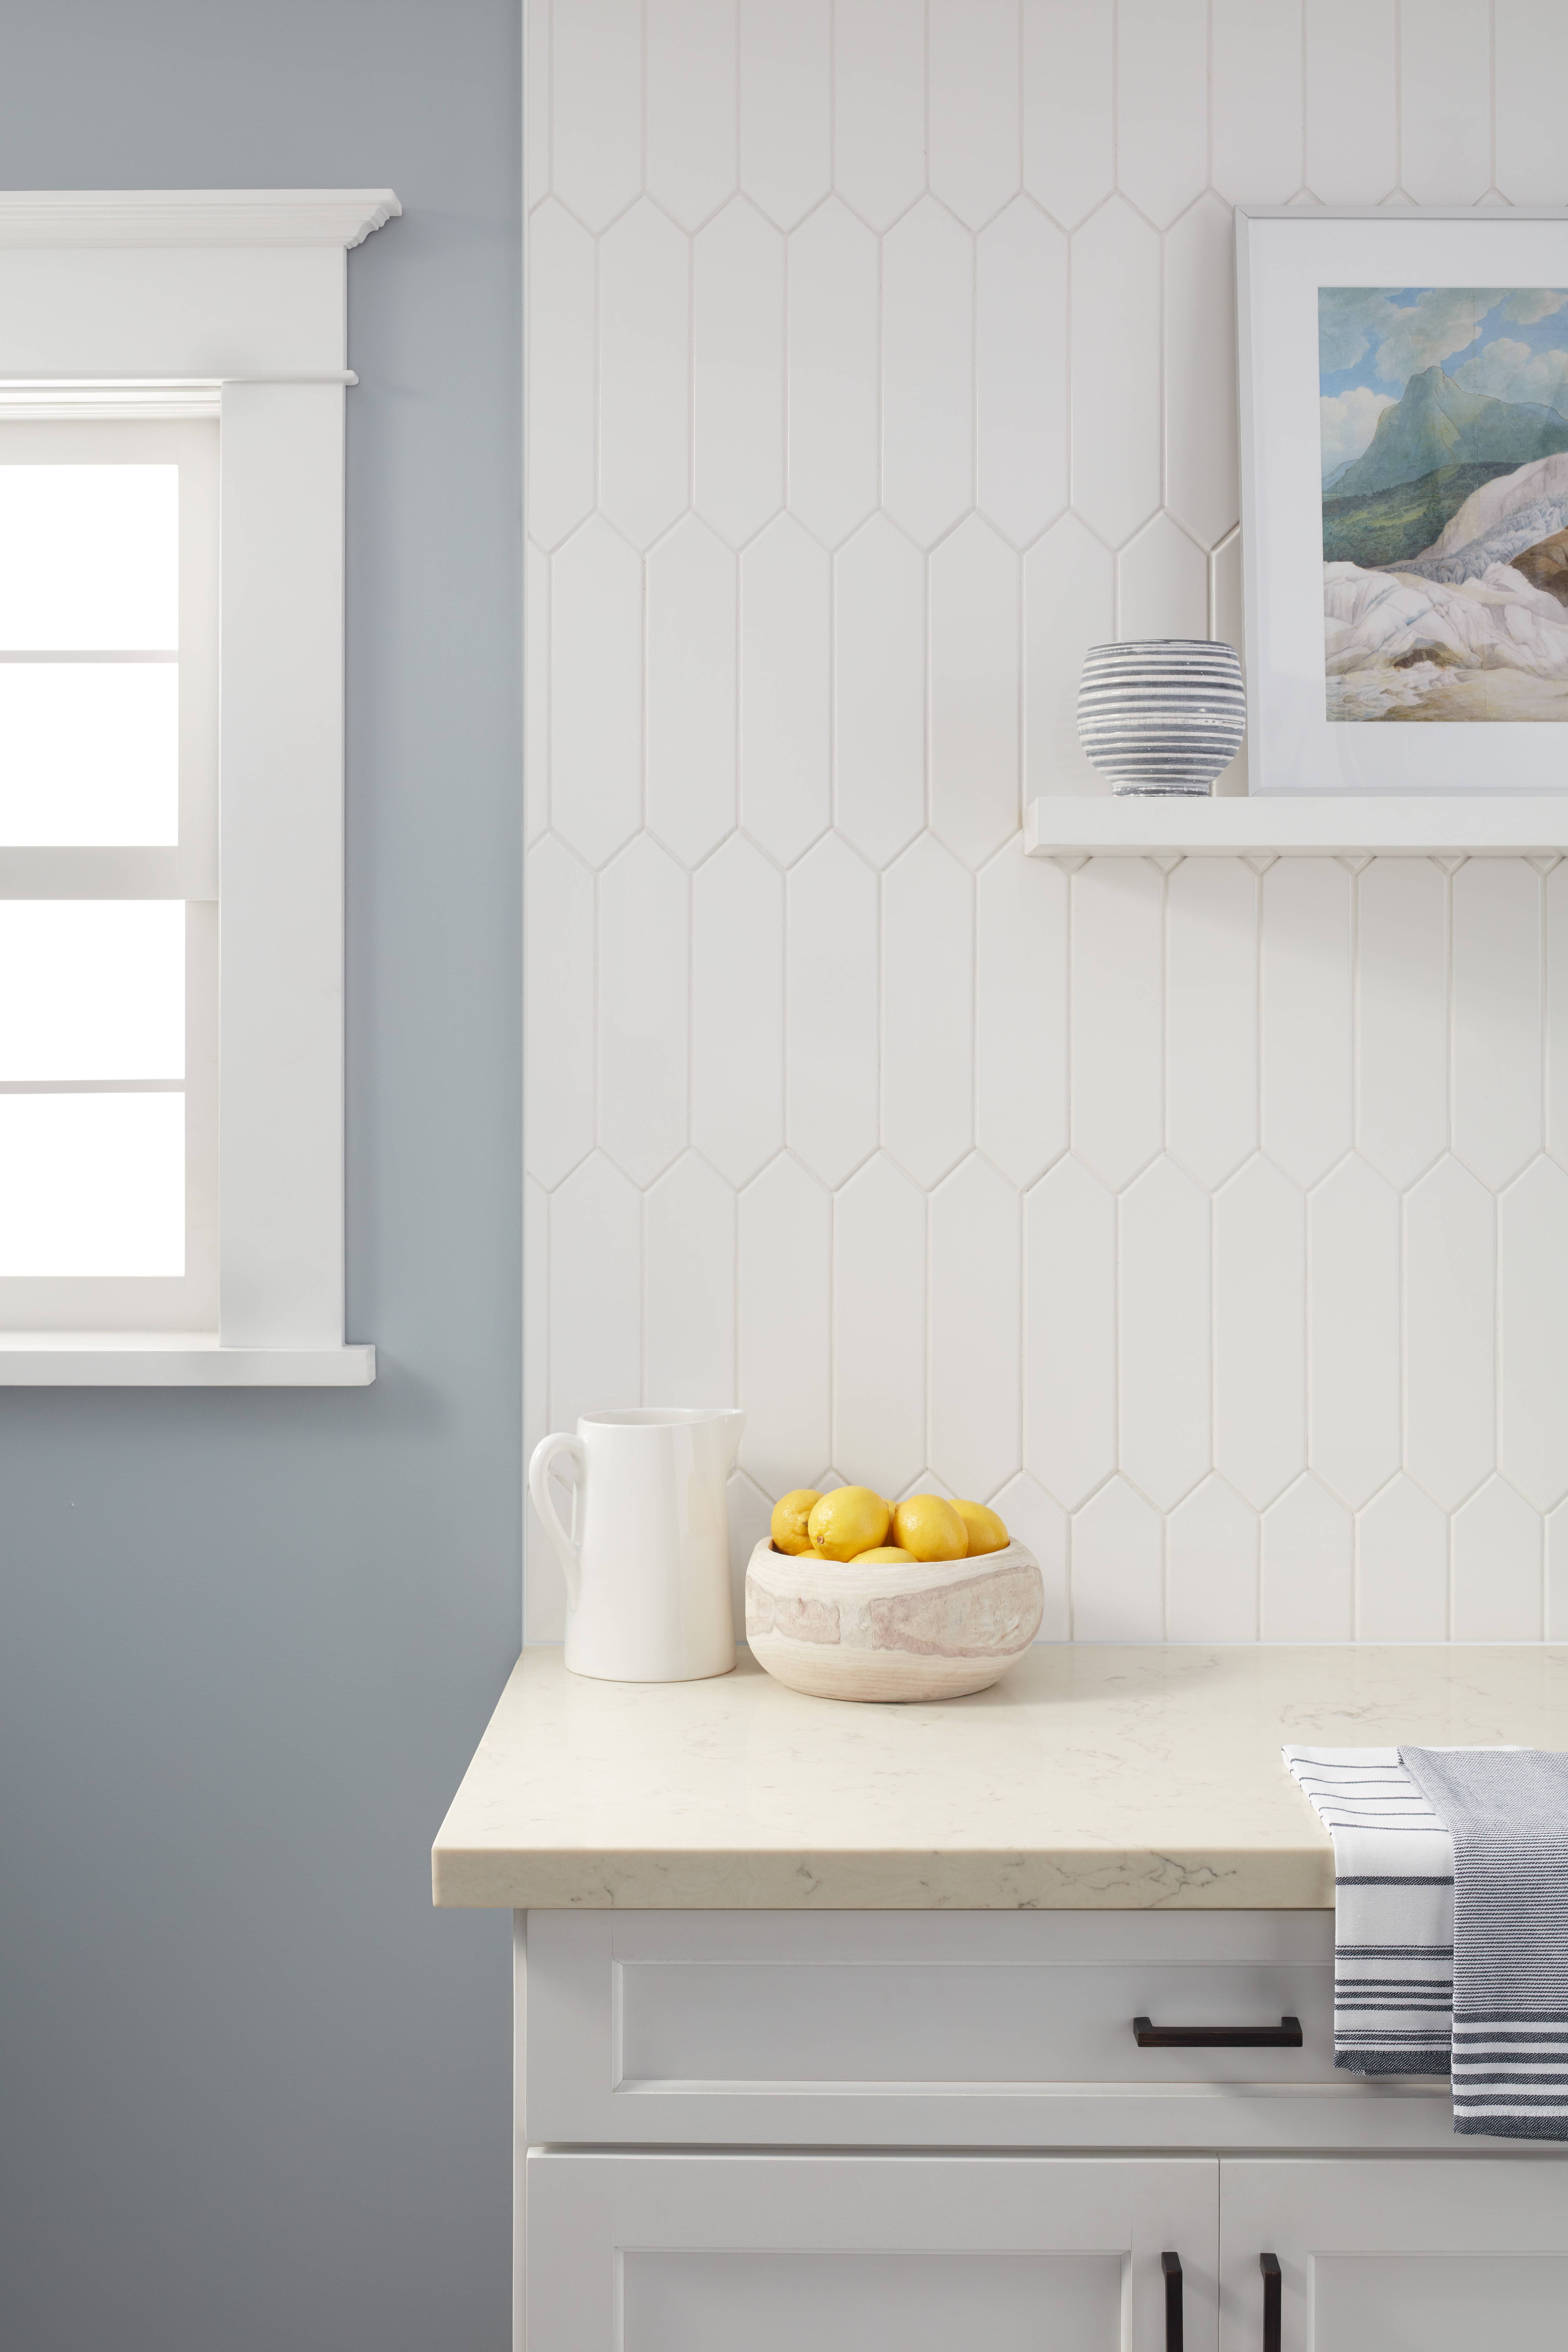 A kitchen wall with white picket tile. 